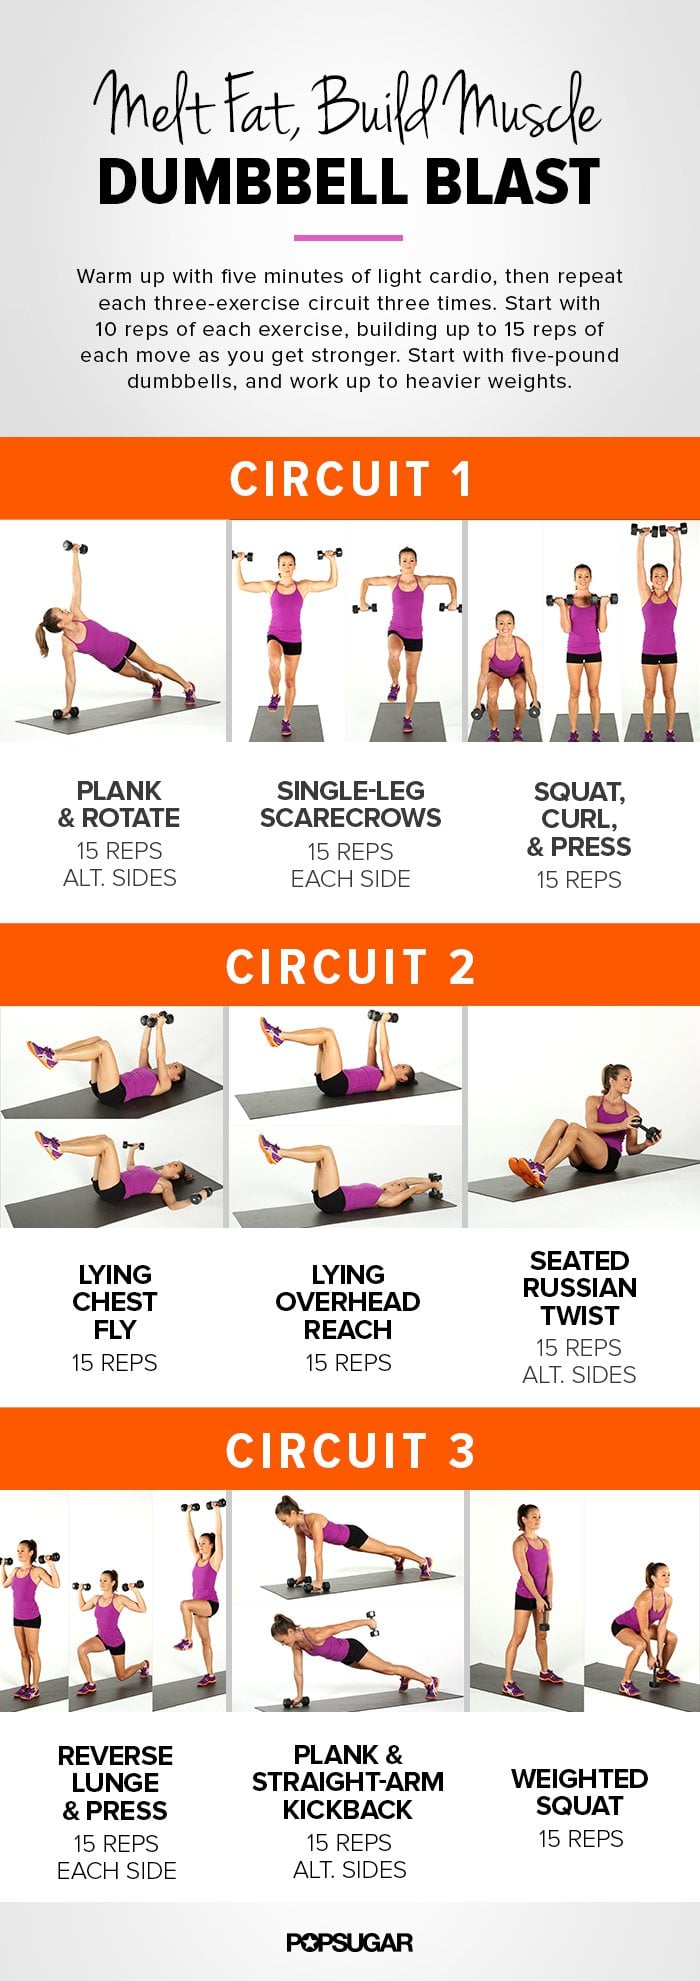 Body toning with dumbbells